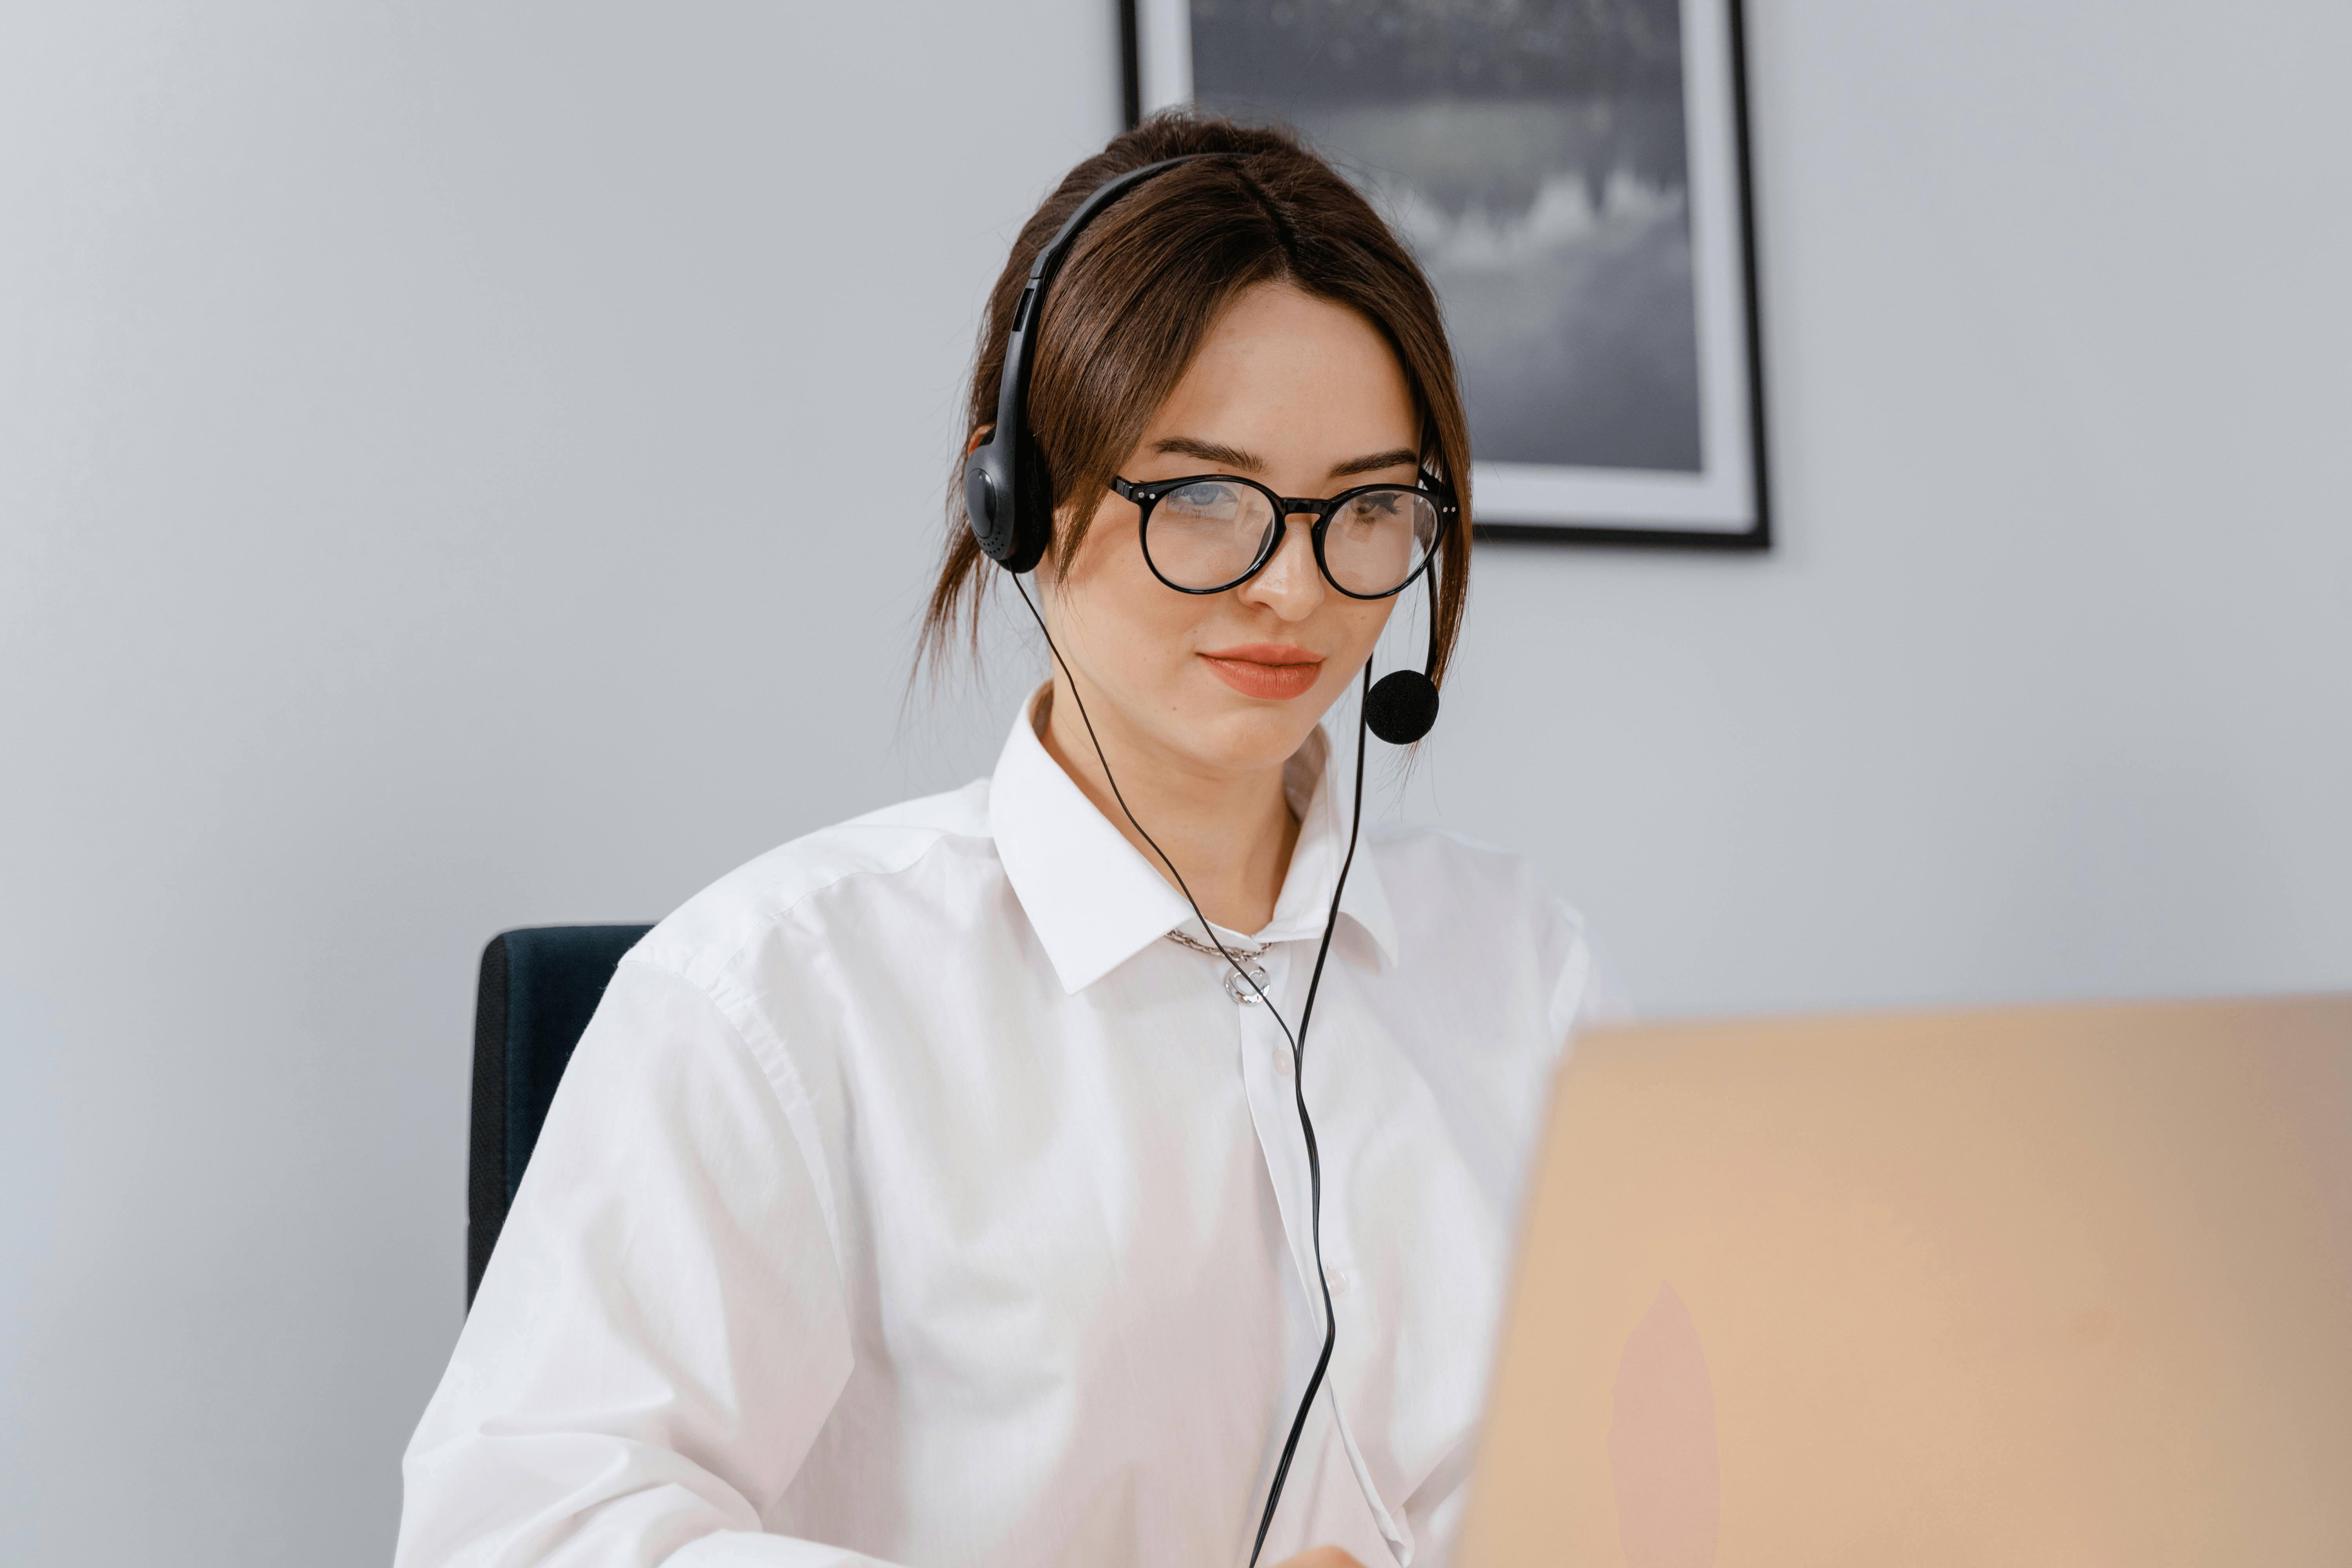 Call Center Woman On Computer